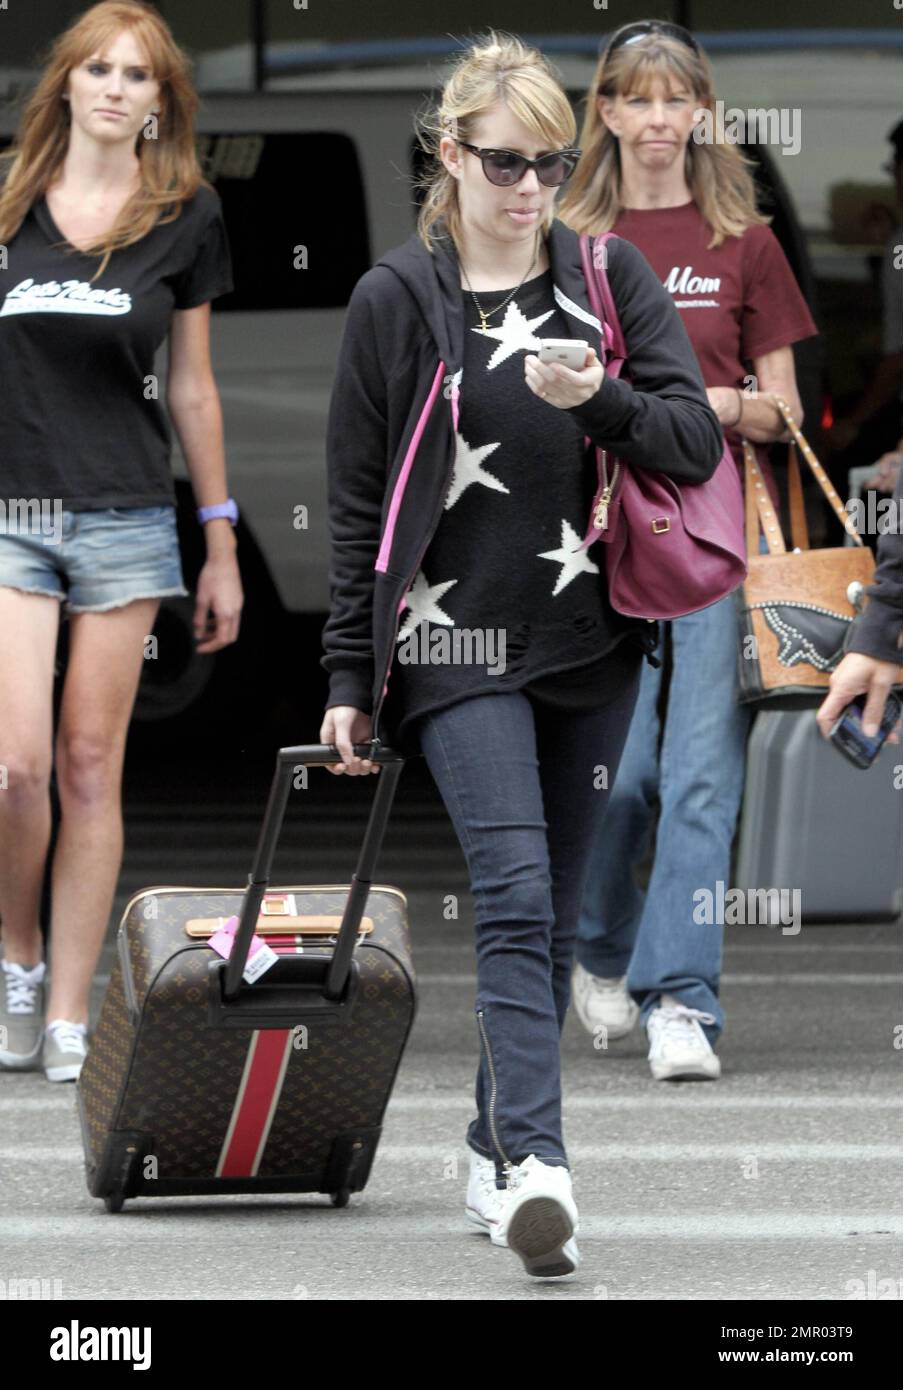 Actress Emma Roberts wears an all-black outfit consisting of a  star-patterned sweater, hoodie and jeans paired with white sneakers as she  arrives at LAX after a flight from Atlanta, GA. Roberts, who